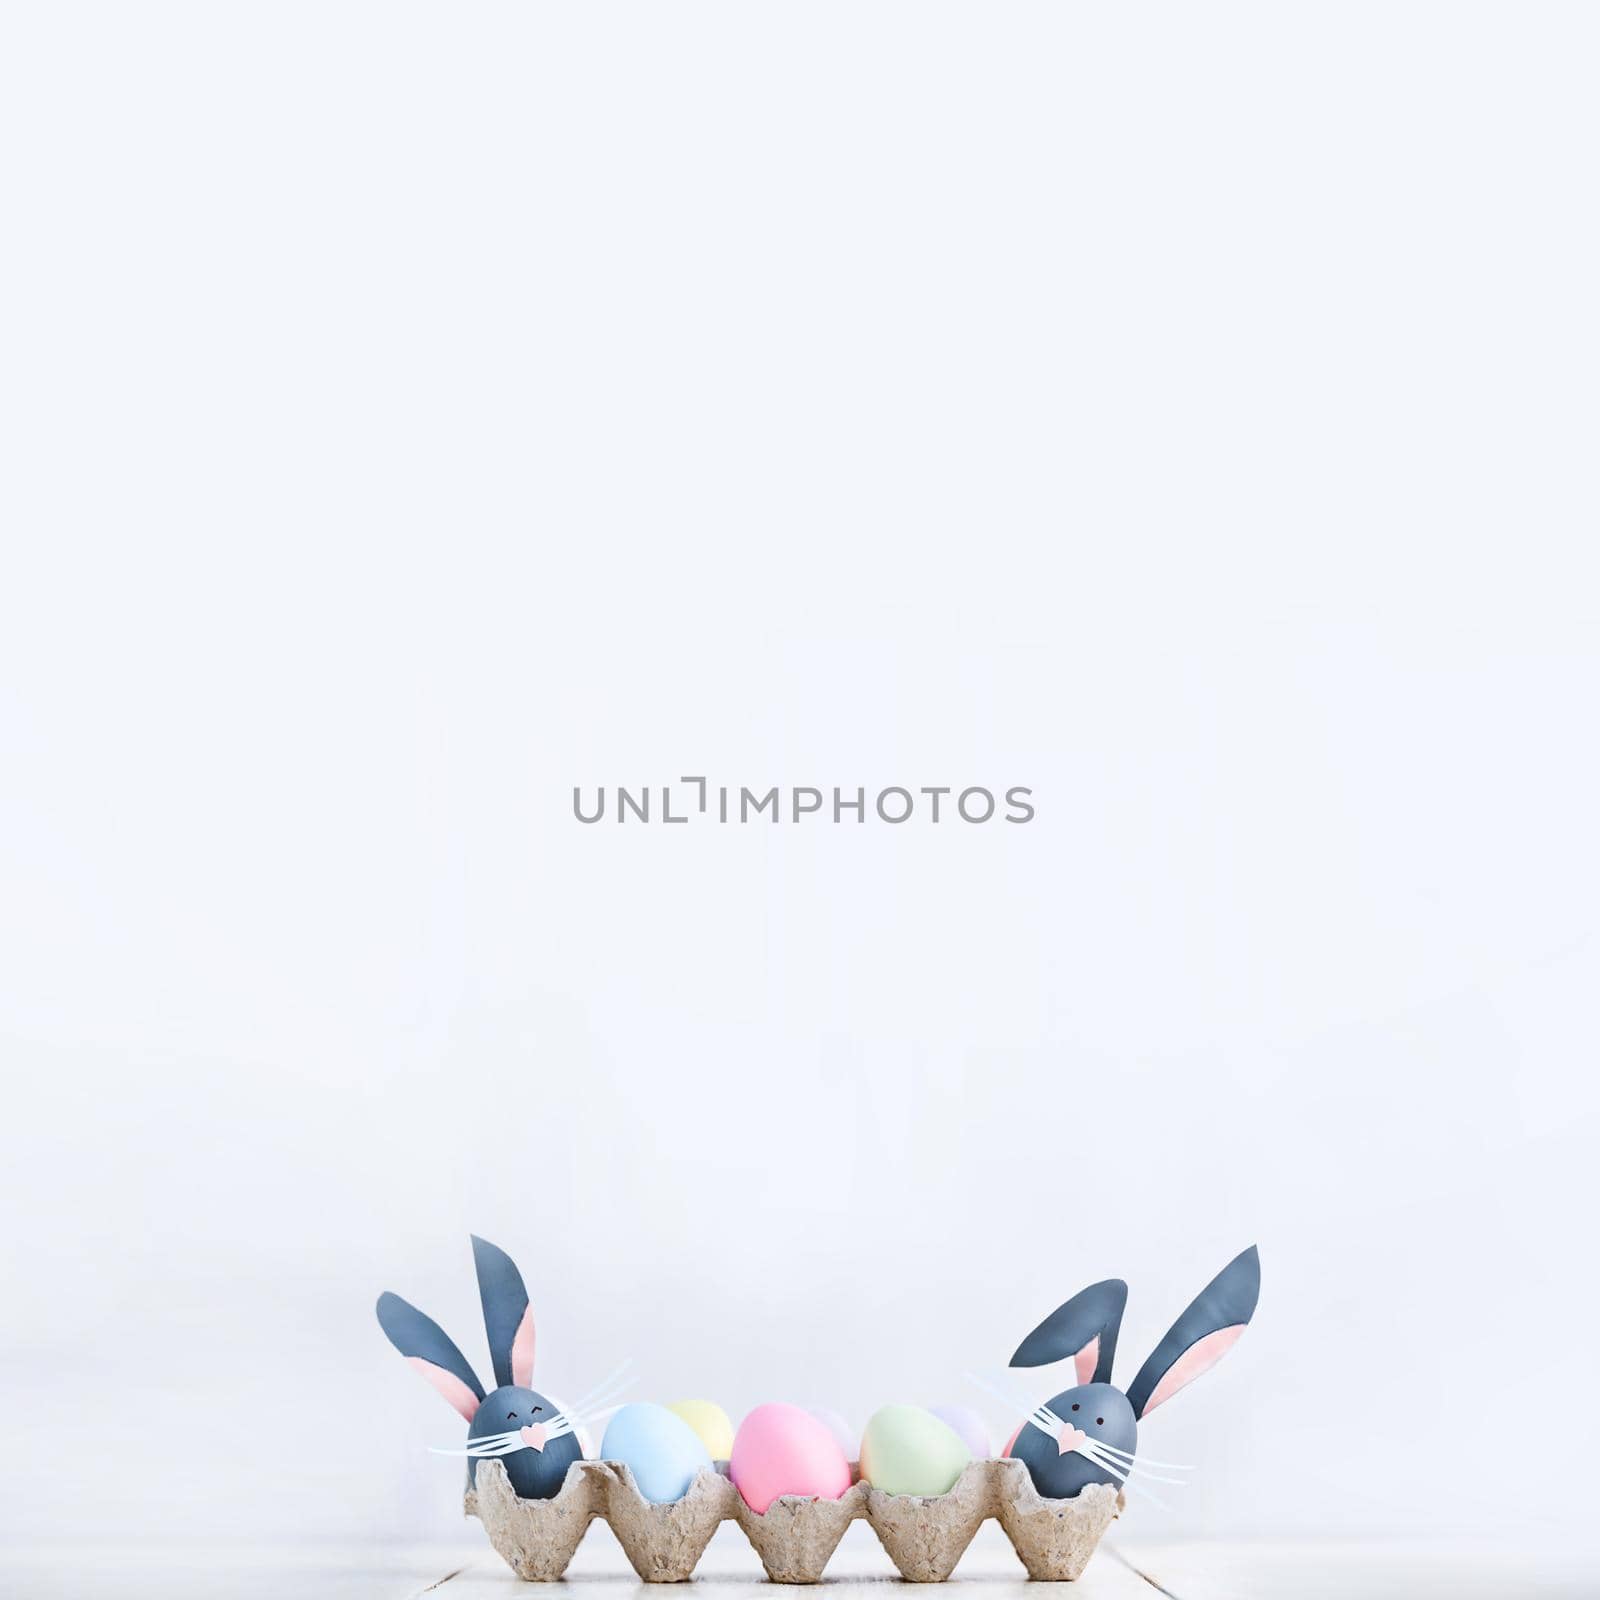 Cute creative photo with easter eggs, some eggs as the Easter Bunny by vvmich